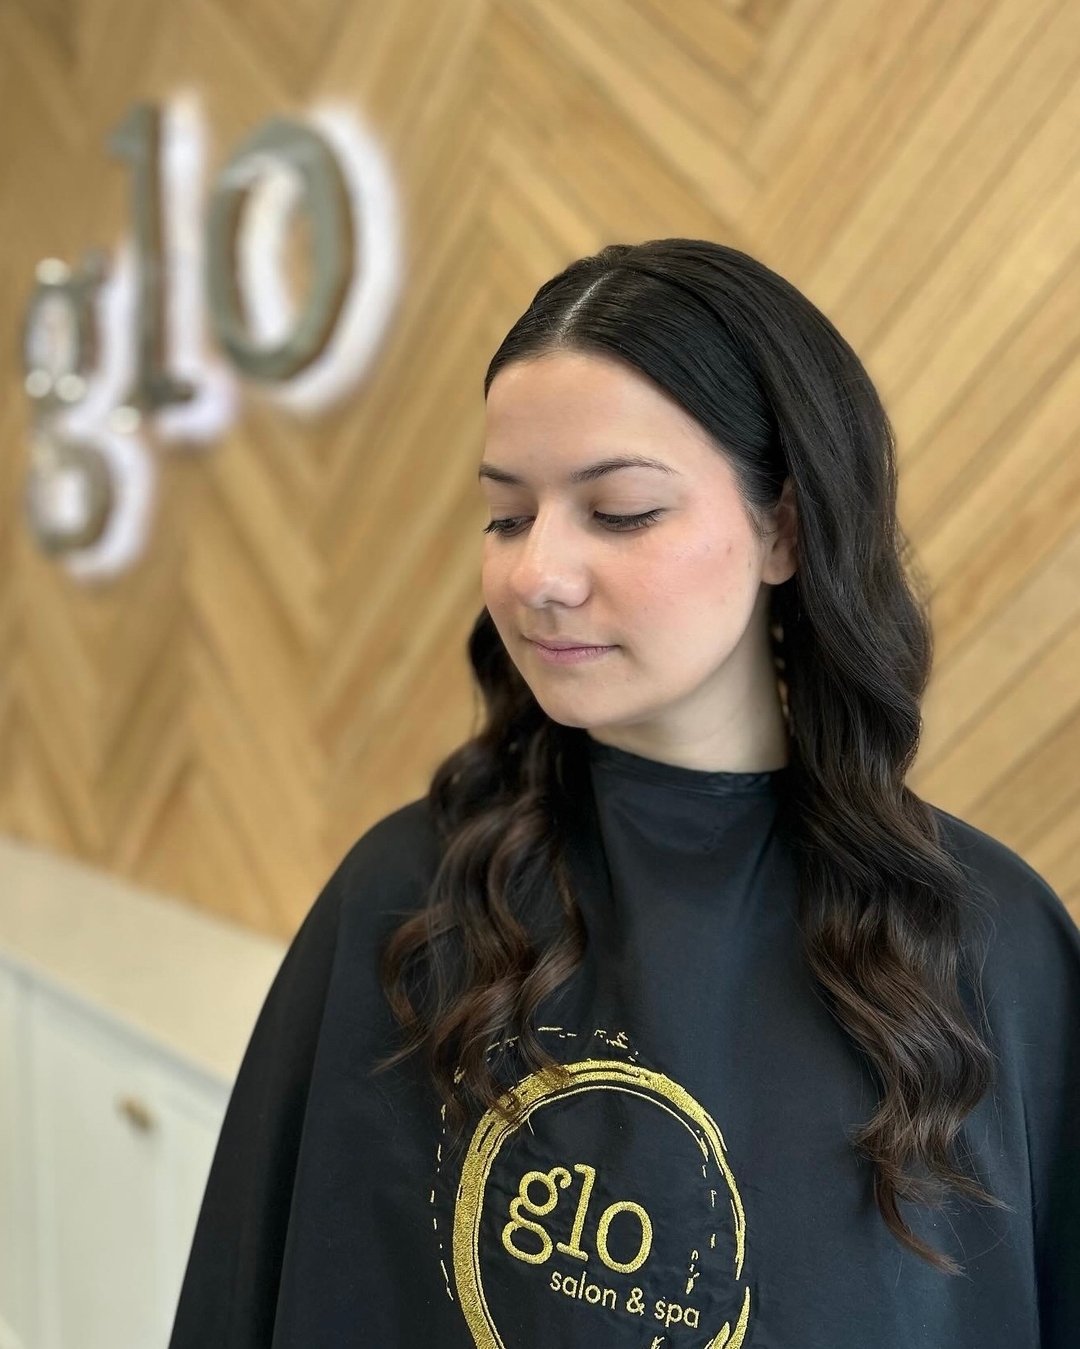 Upstyle| Ashlan Case
.
.
.
.
 #stillwaterok #stillwaterhair #stillwaterhair #stillwatersalon #stillwaterspa #visitstillwater #relaxation #selfcare #shopsmall #supportsmallbusinesses #shoplocal